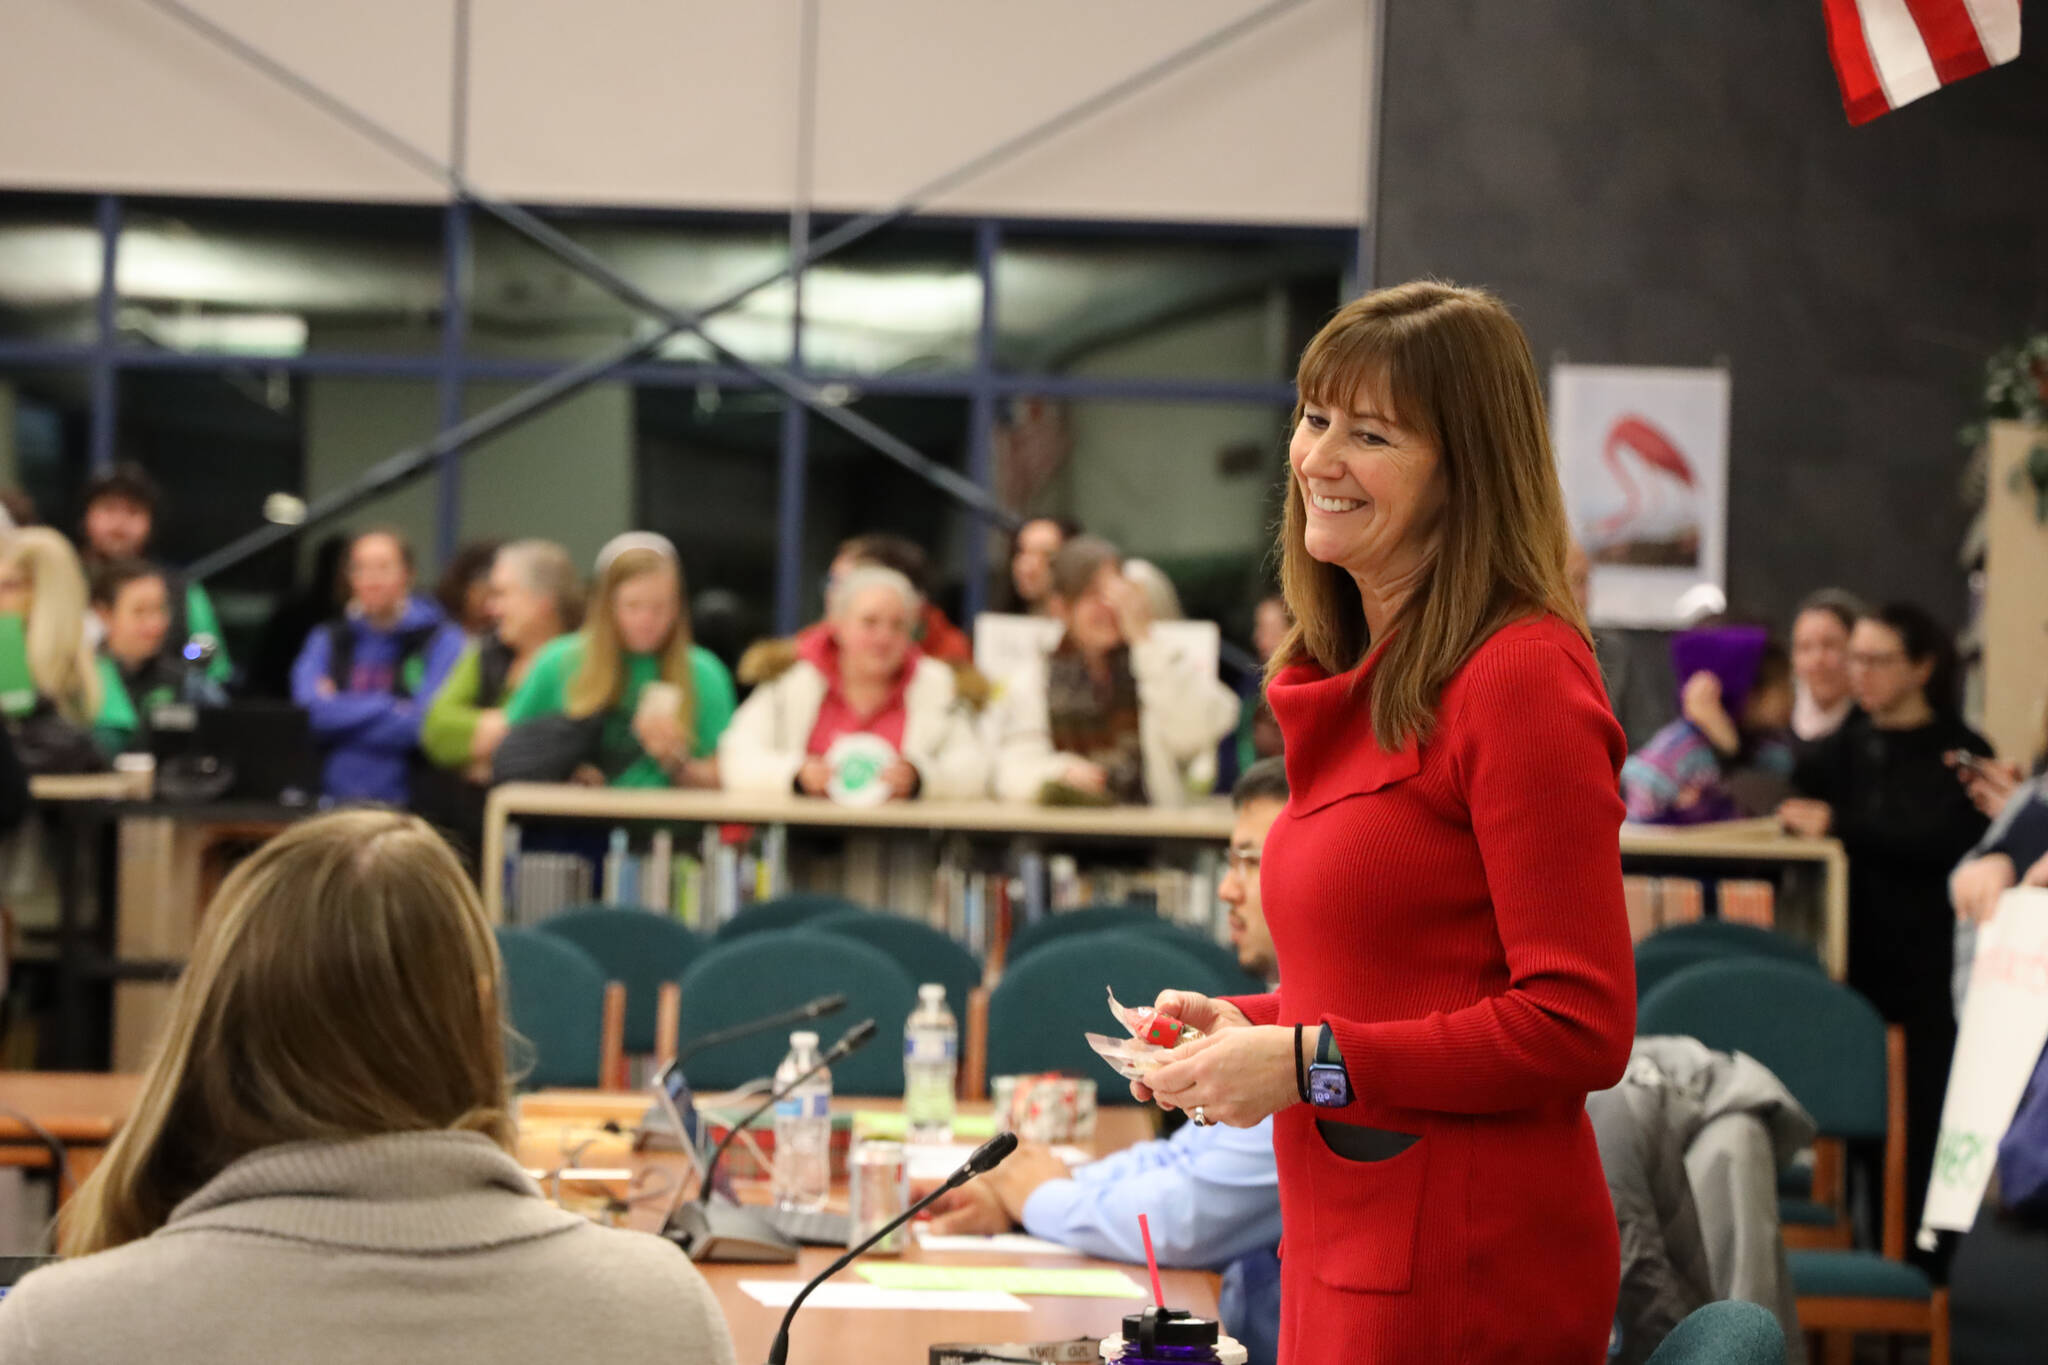 Outgoing Juneau School District Superintendent Bridget Weiss smiles during a school board meeting in early December. Tuesday afternoon, the Board of Education approved a contract to search for her replacement. (Clarise Larson / Juneau Empire)